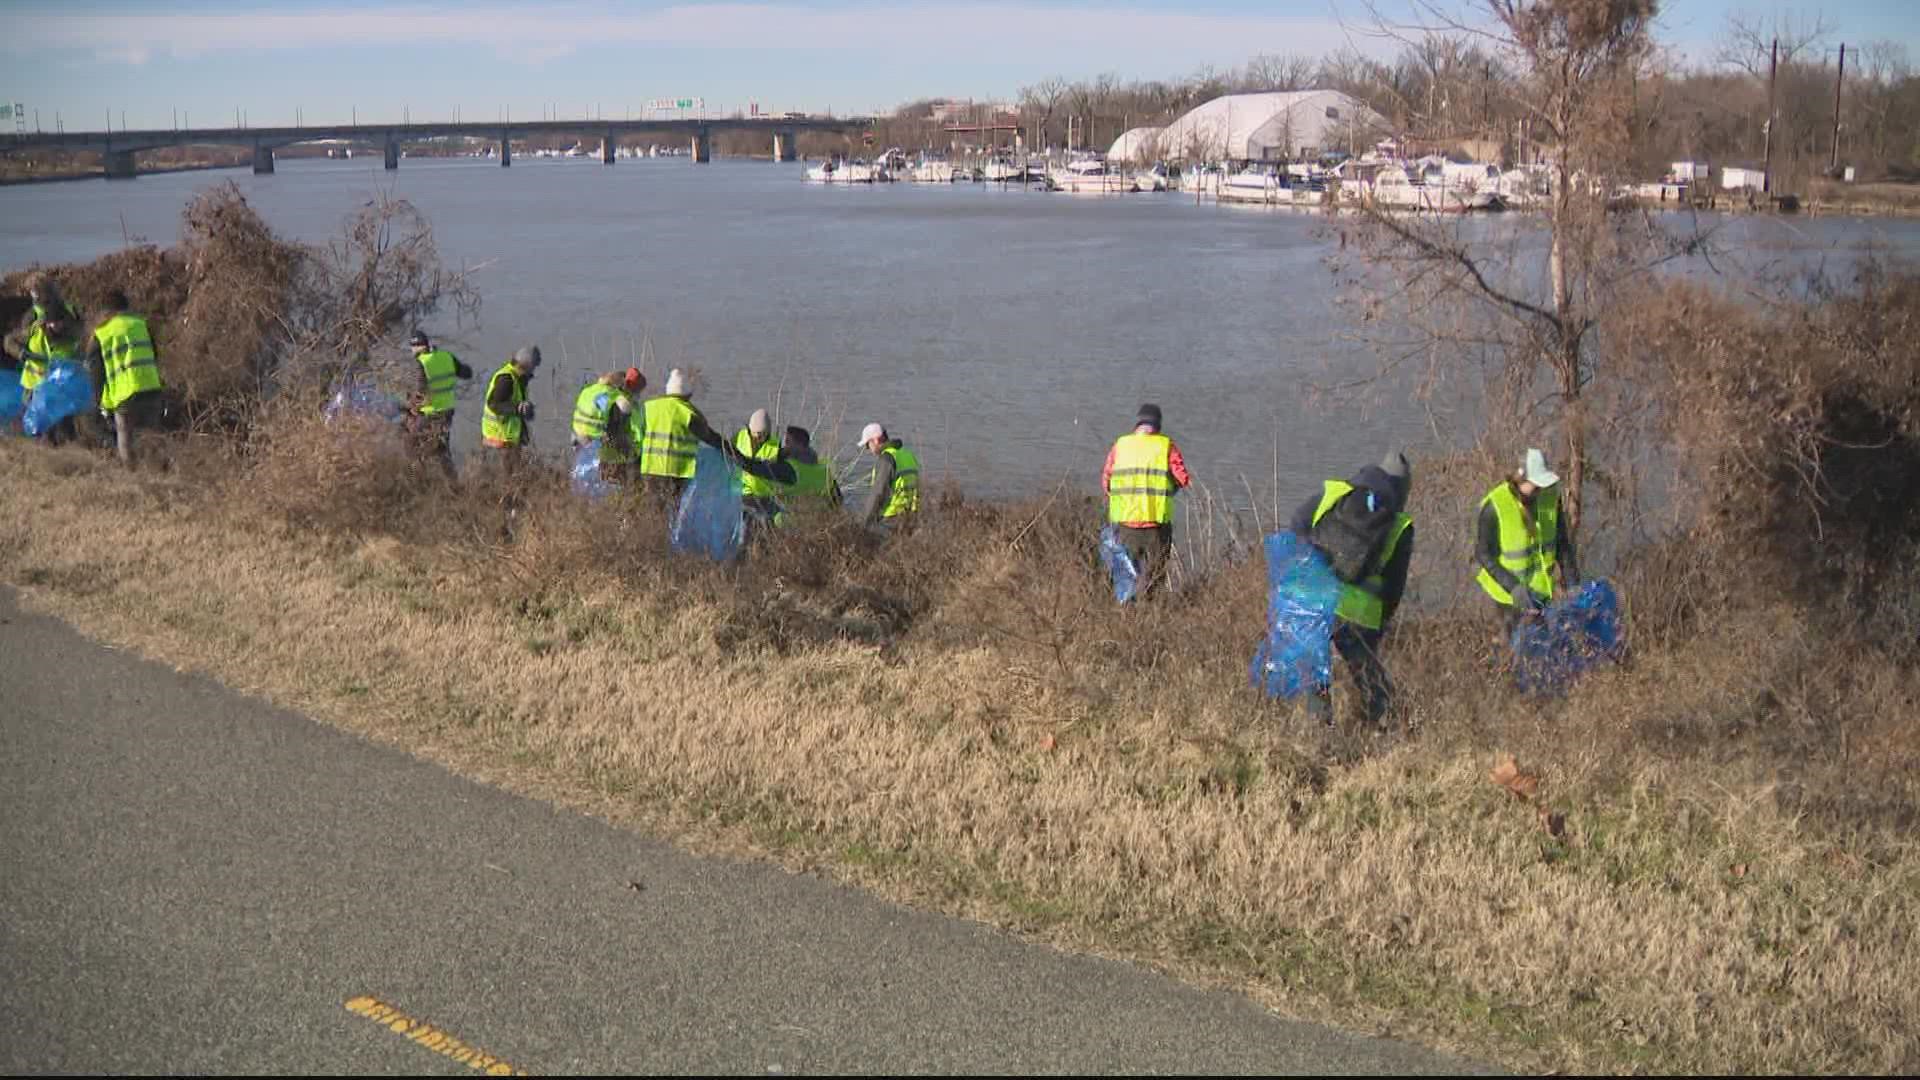 SCA and NPS met up on Martin Luther King Jr. Day to spend part of their day cleaning up trash along the Anacostia River and spread out across the coastline.